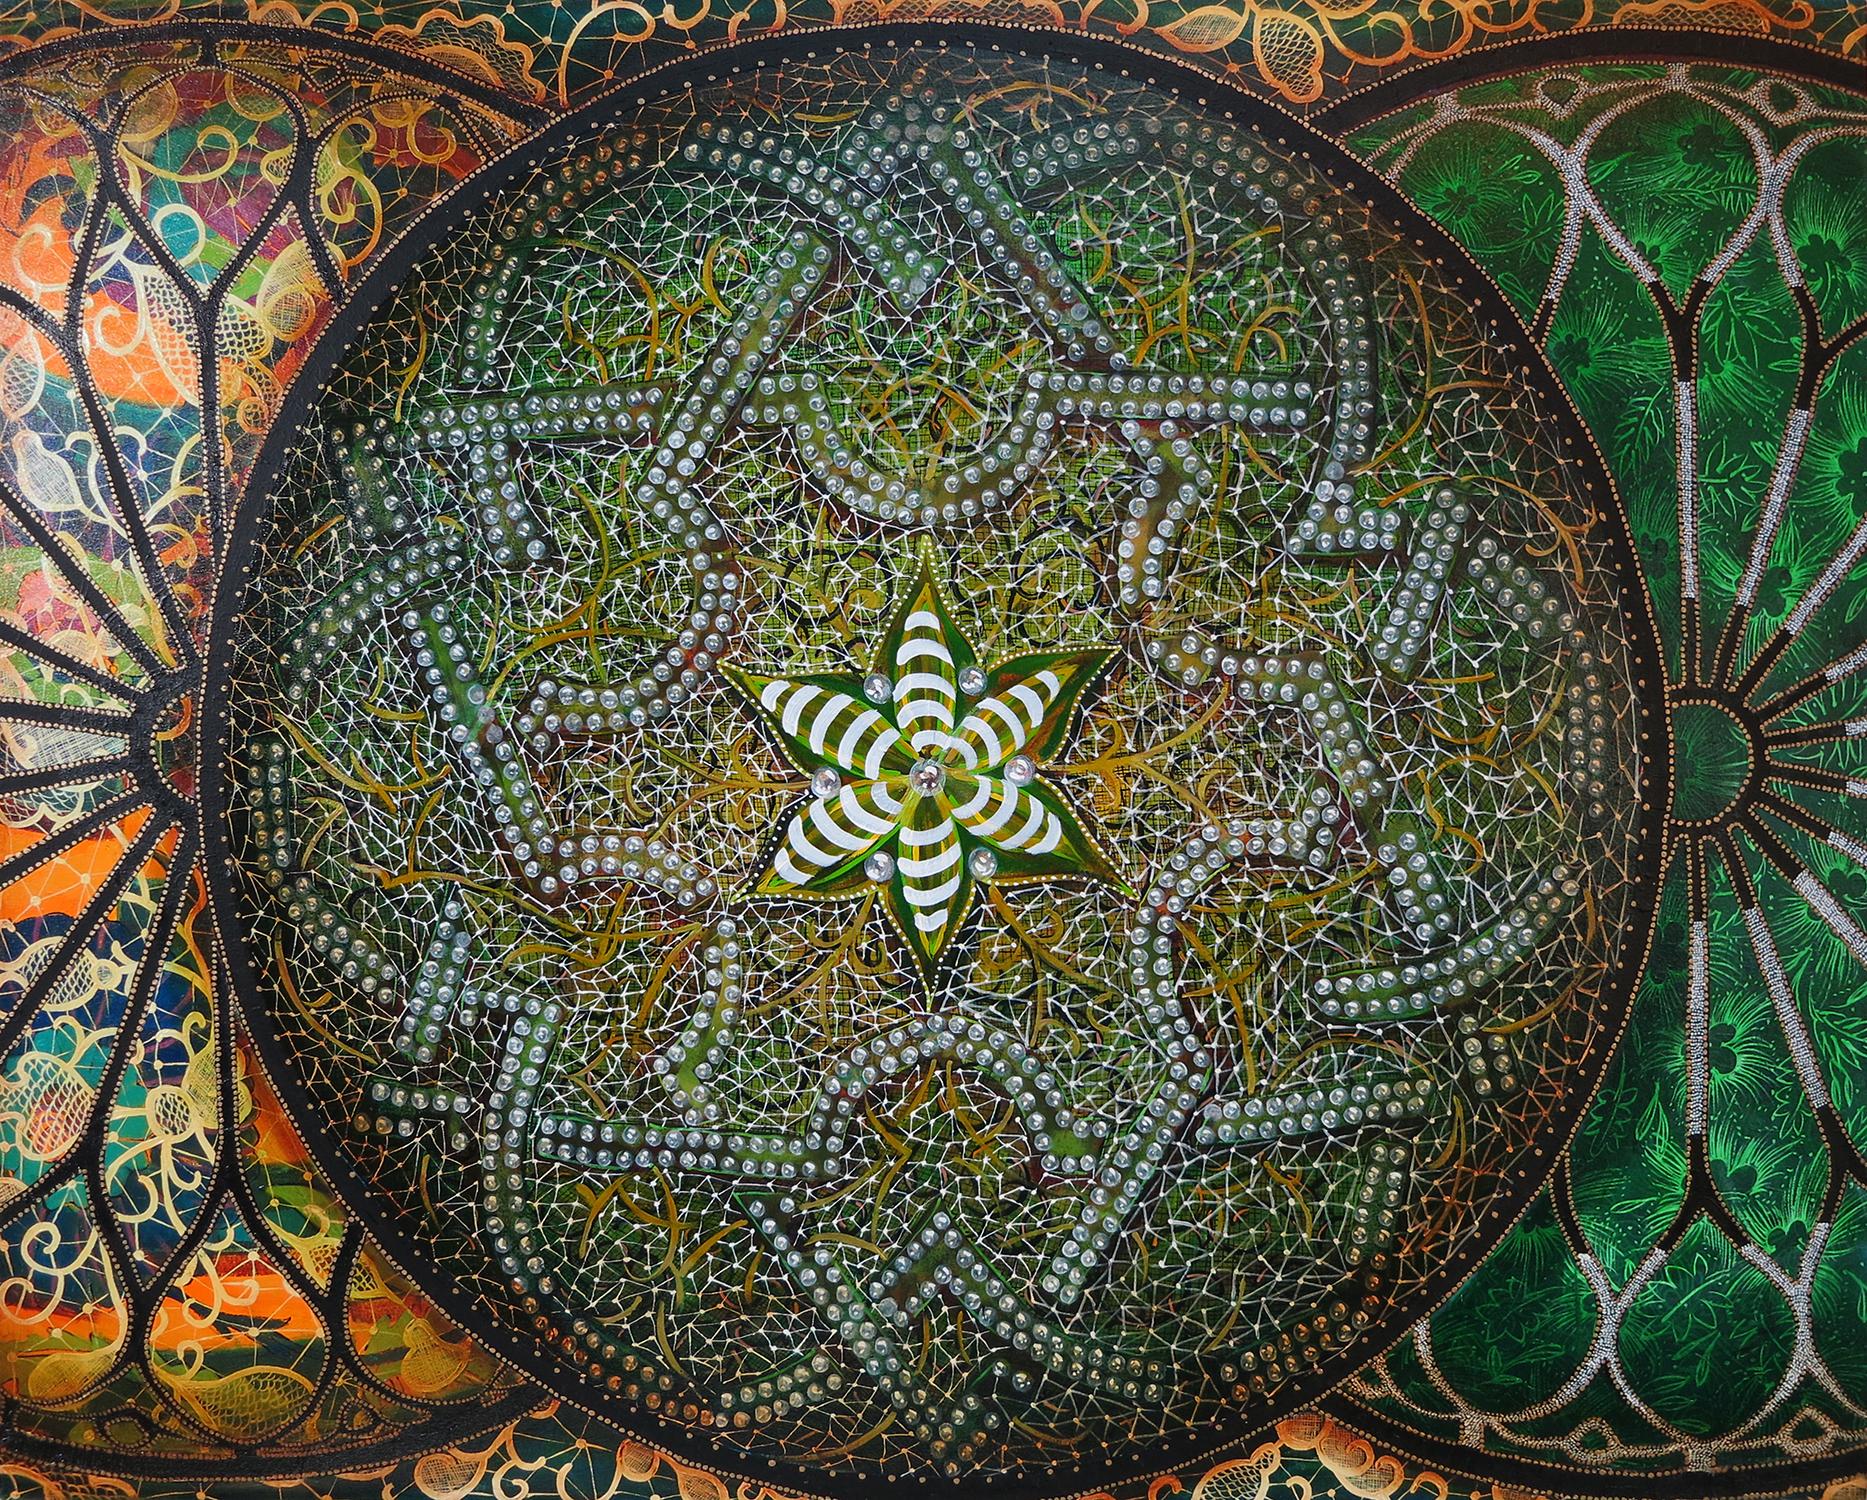 "In the Absence of a Grand Unified Field Theory" is one of a limited edition of 30 archival pigment prints of an original oil painting on canvas by Amy Cheng. It is part of a Mandala Series she produced in the 2010's. The central convex sphere